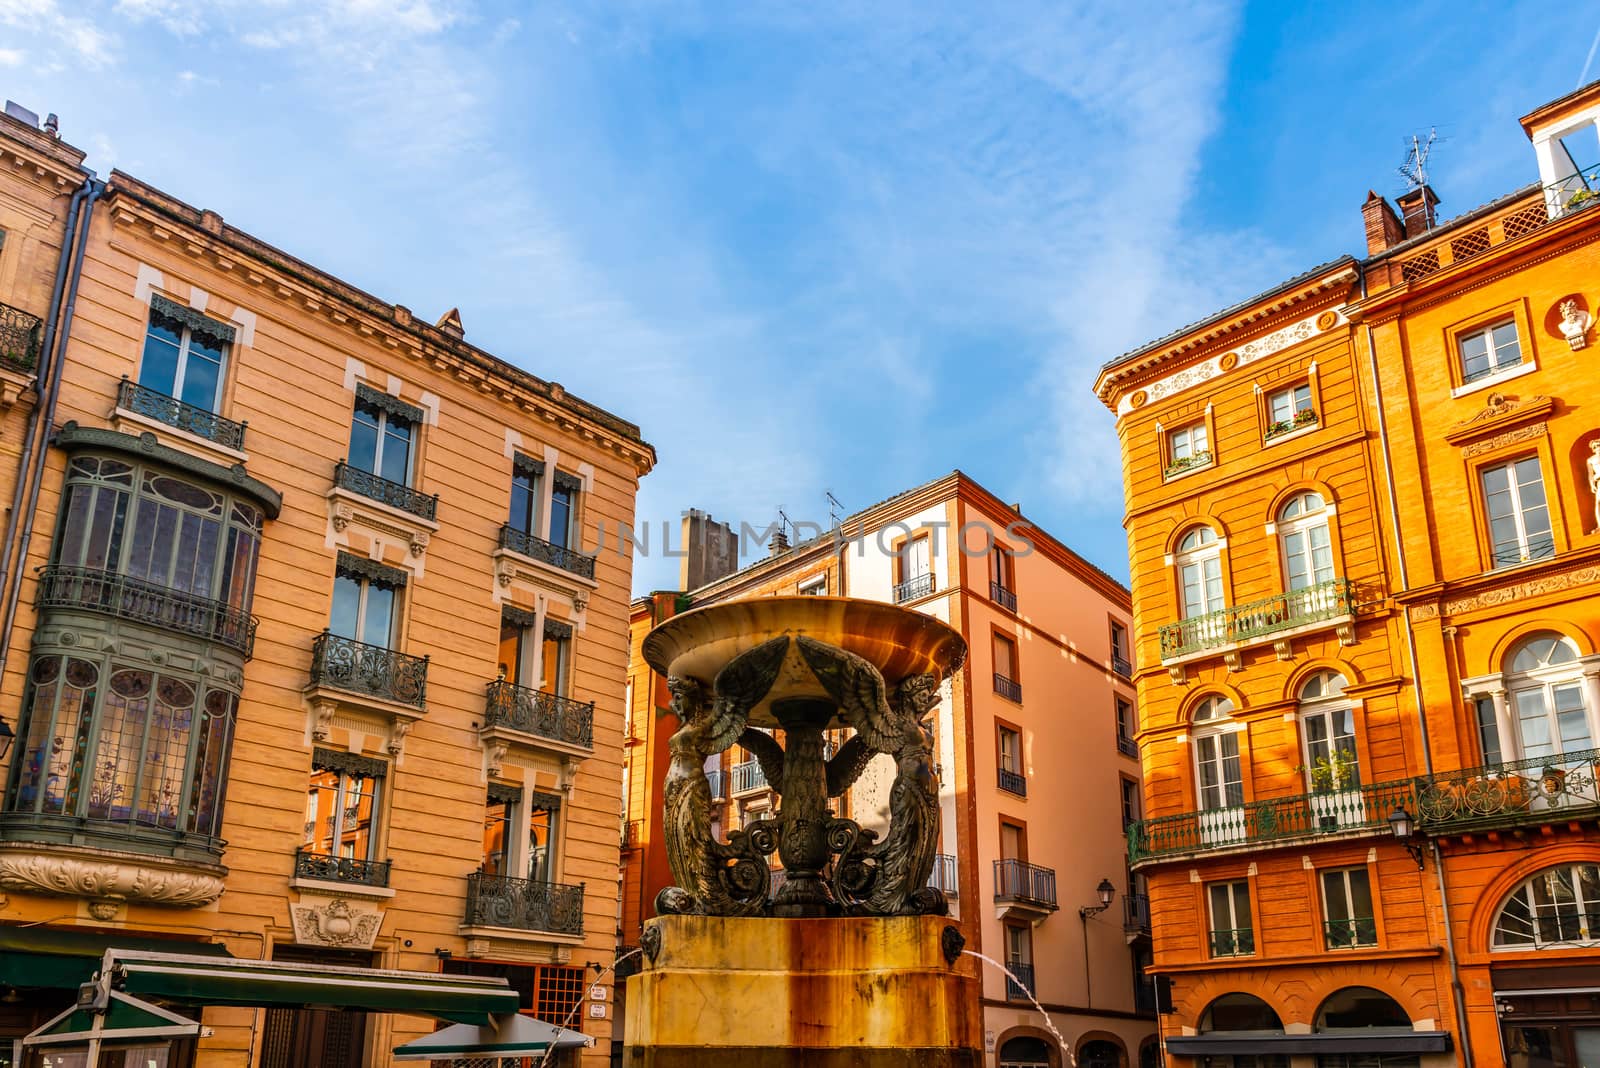 Place de la Trinité is a square in the historic center of Toulouse, France. It is located north of the Carmes district, in sector 1 of the city. It belongs to the safeguarded sector of Toulouse. This small triangular square was not built until the 19th century.